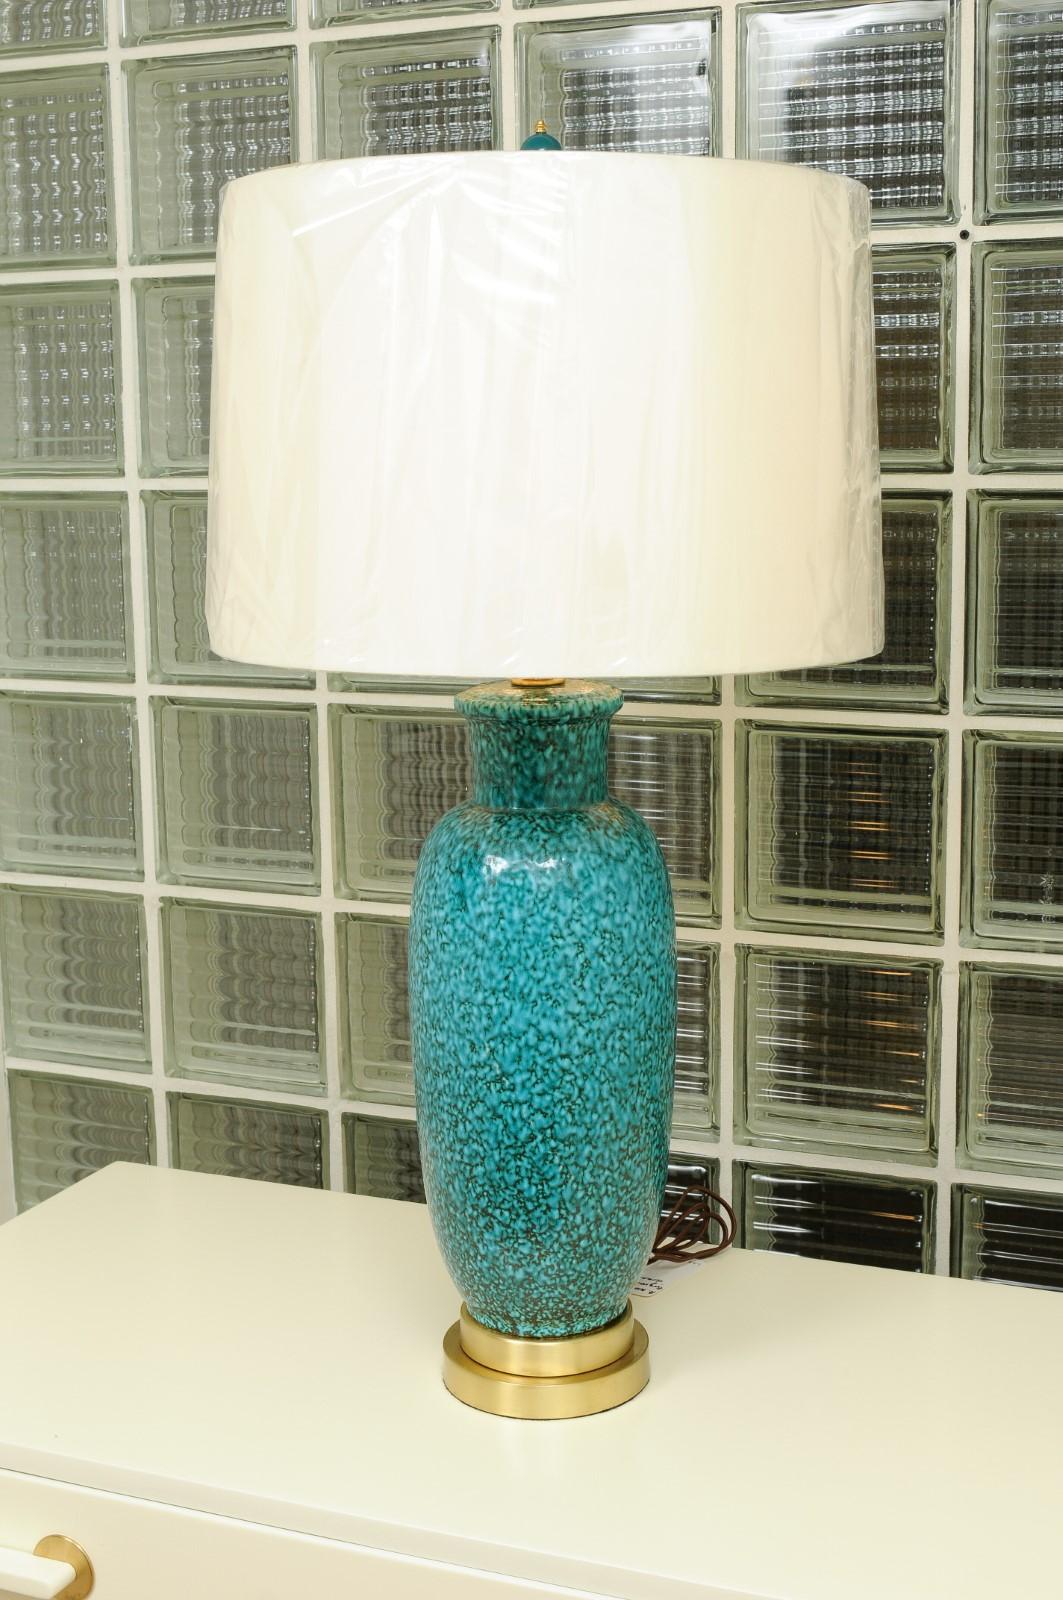 Exceptional Pair of Restored Italian Ceramic Lamps in Turquoise, circa 1960 For Sale 2